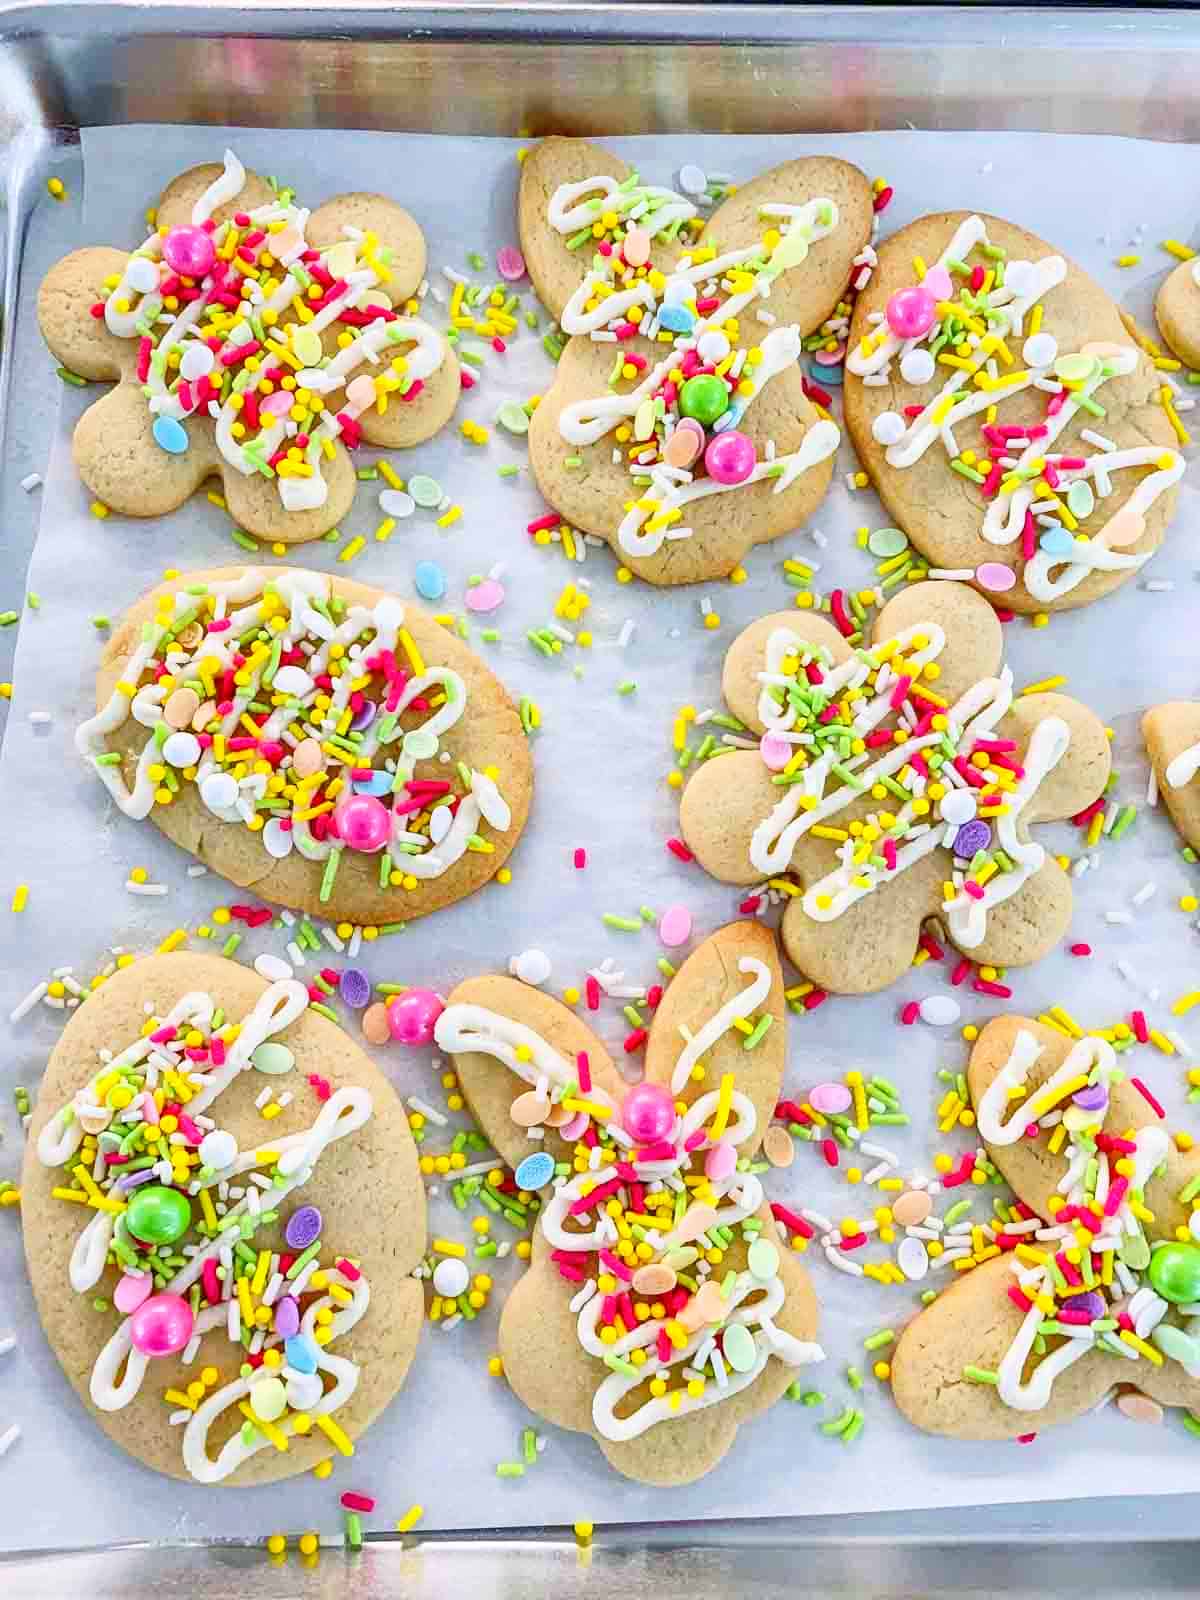 A large sheet pan lined with parchment paper and baked and decorated Easter cookies with sprinkles and icing.